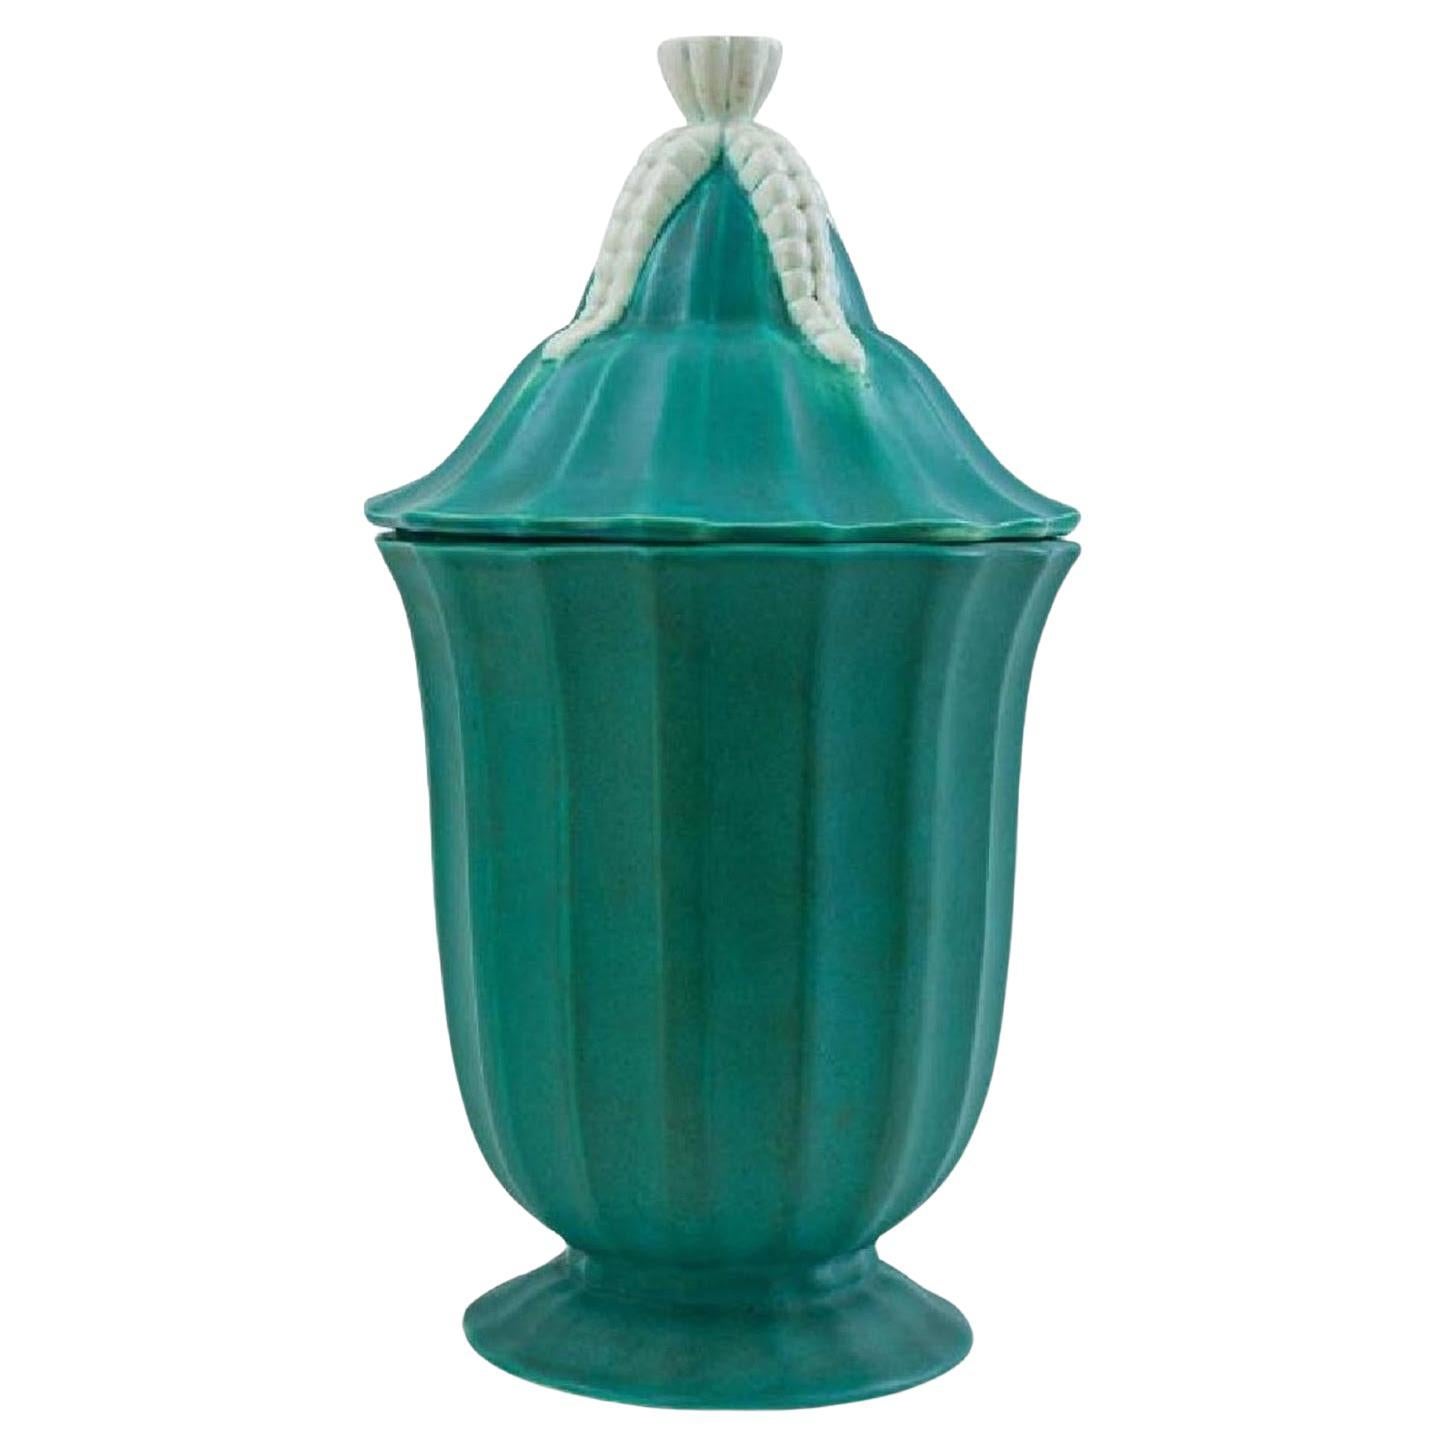 Lidded Vase by Gio Ponti for Richard Ginori, 1930s For Sale